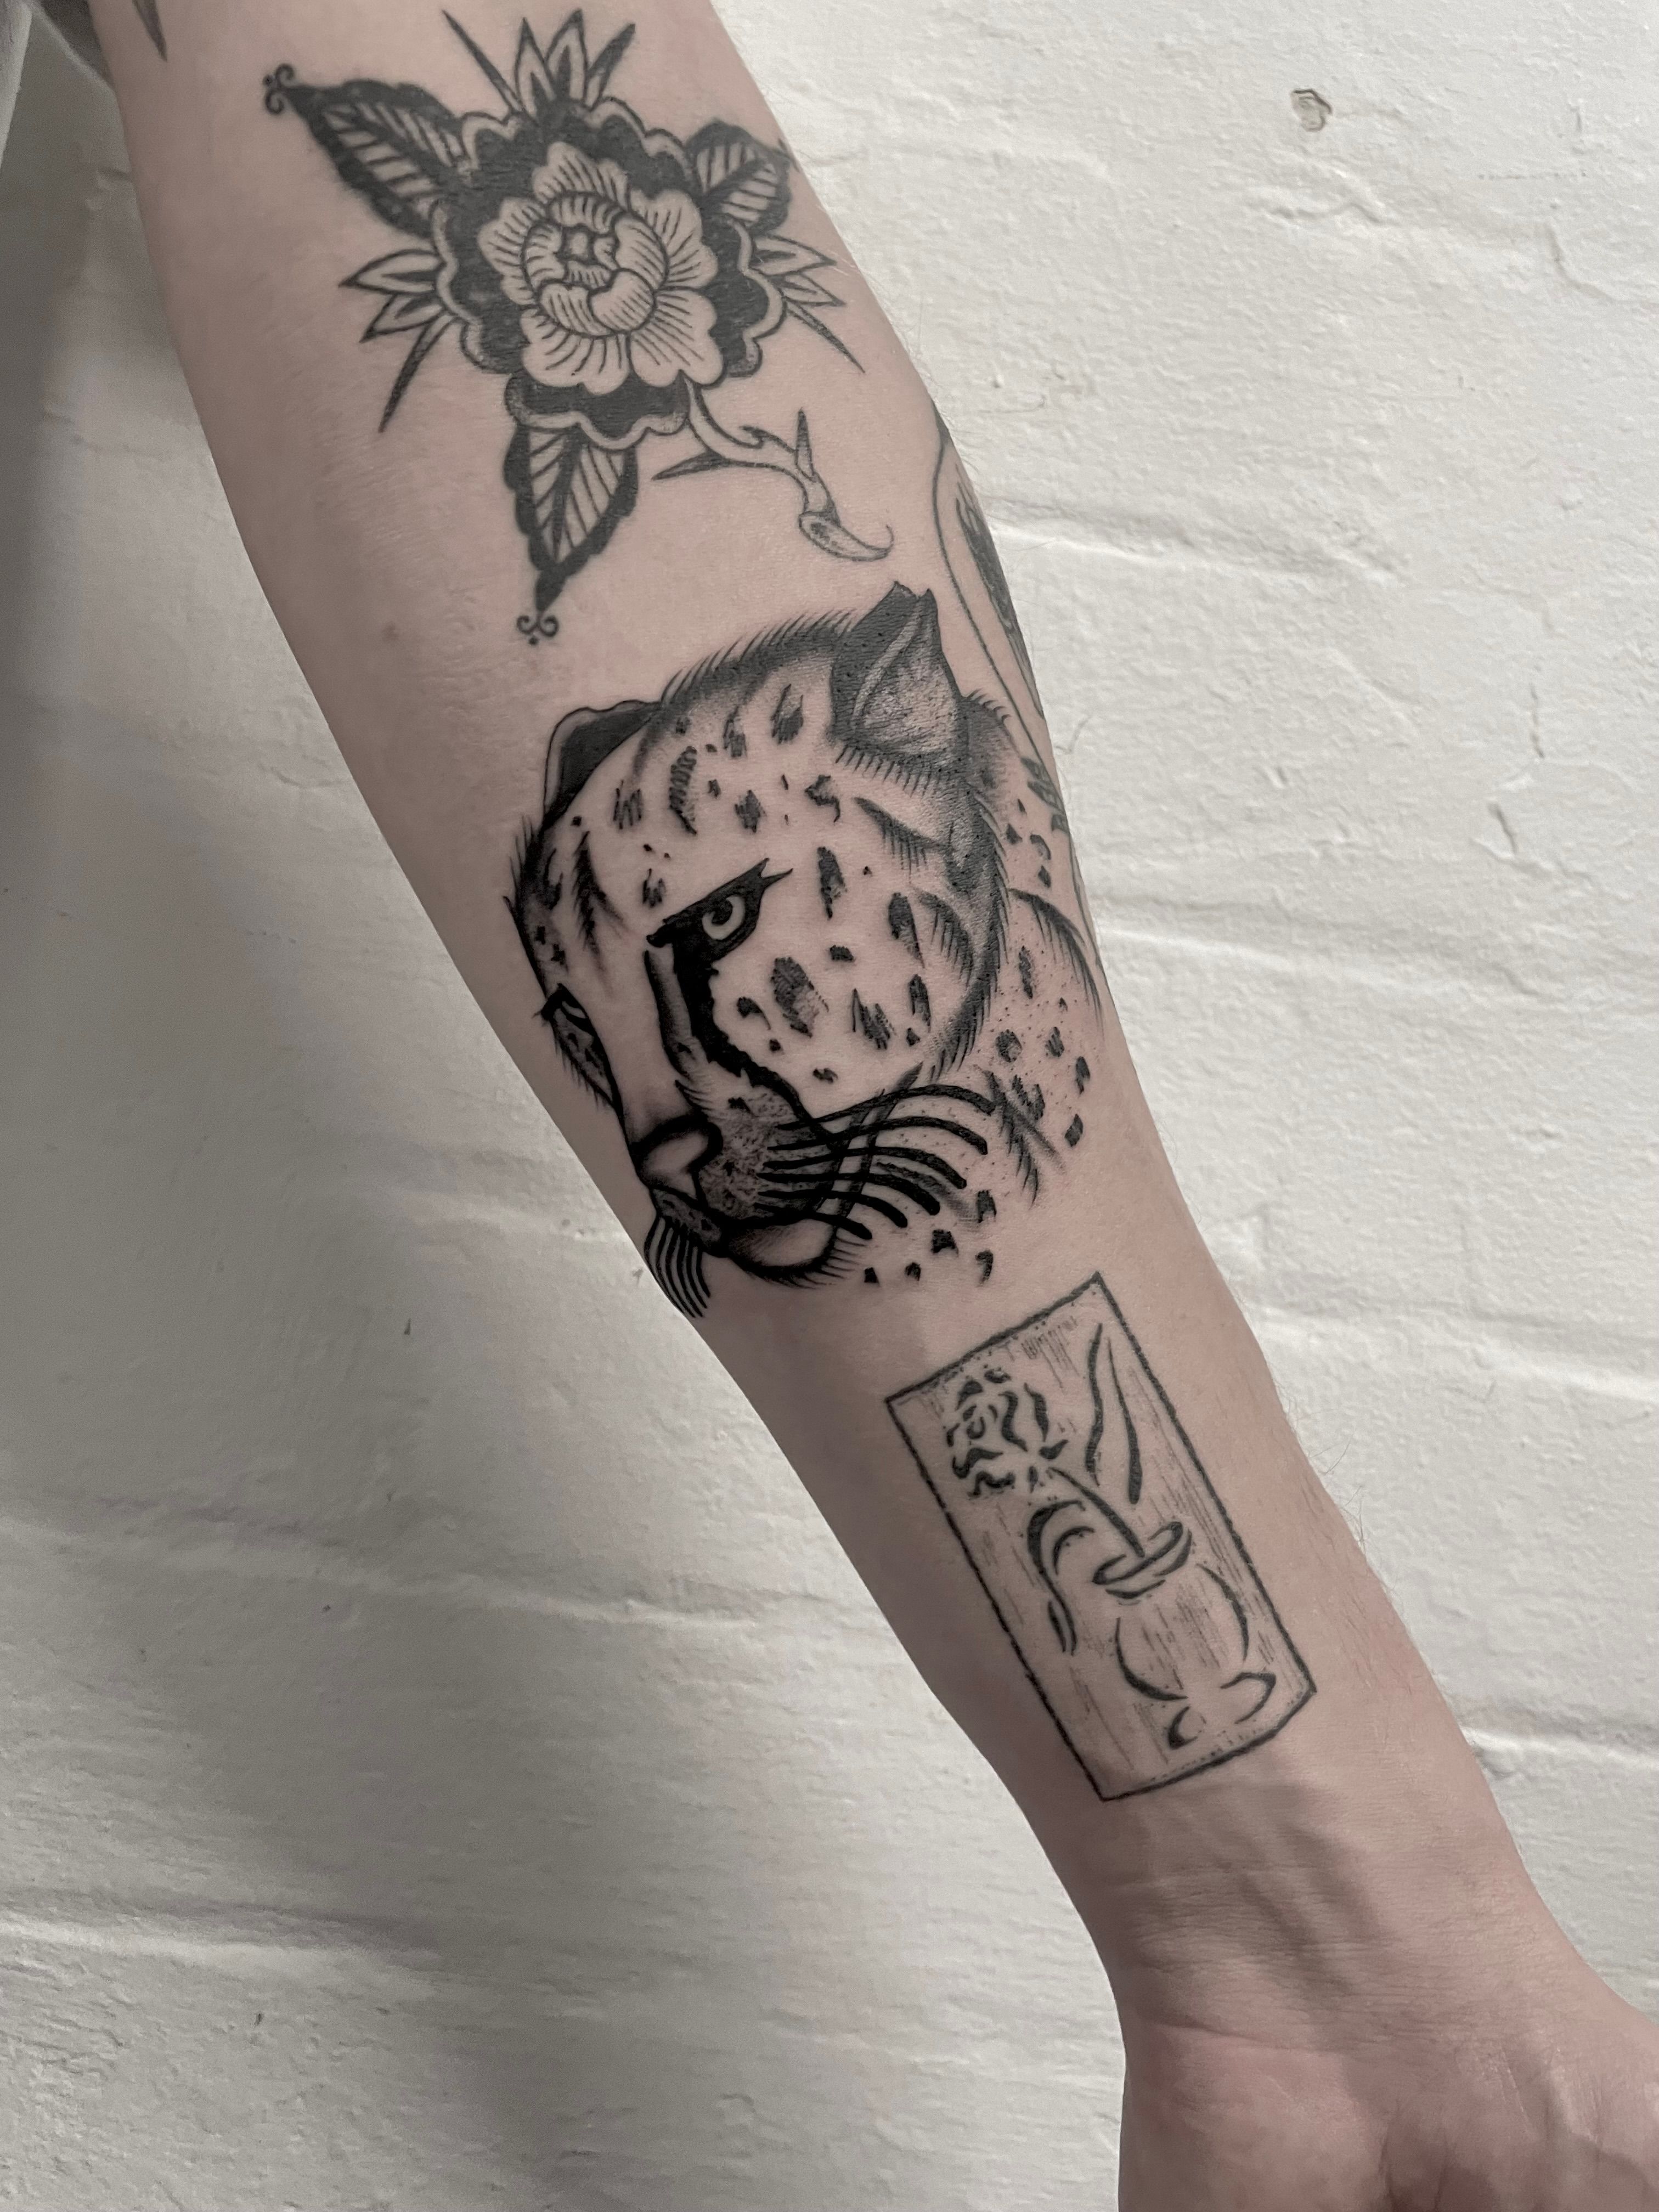 Classic Tattoo Jax - Killer @jaguars tattoo by @suttontattoo #dtwd Come get  yours from Jon, or show him your ideas he can draw your dreams big as your  bank account! DM him